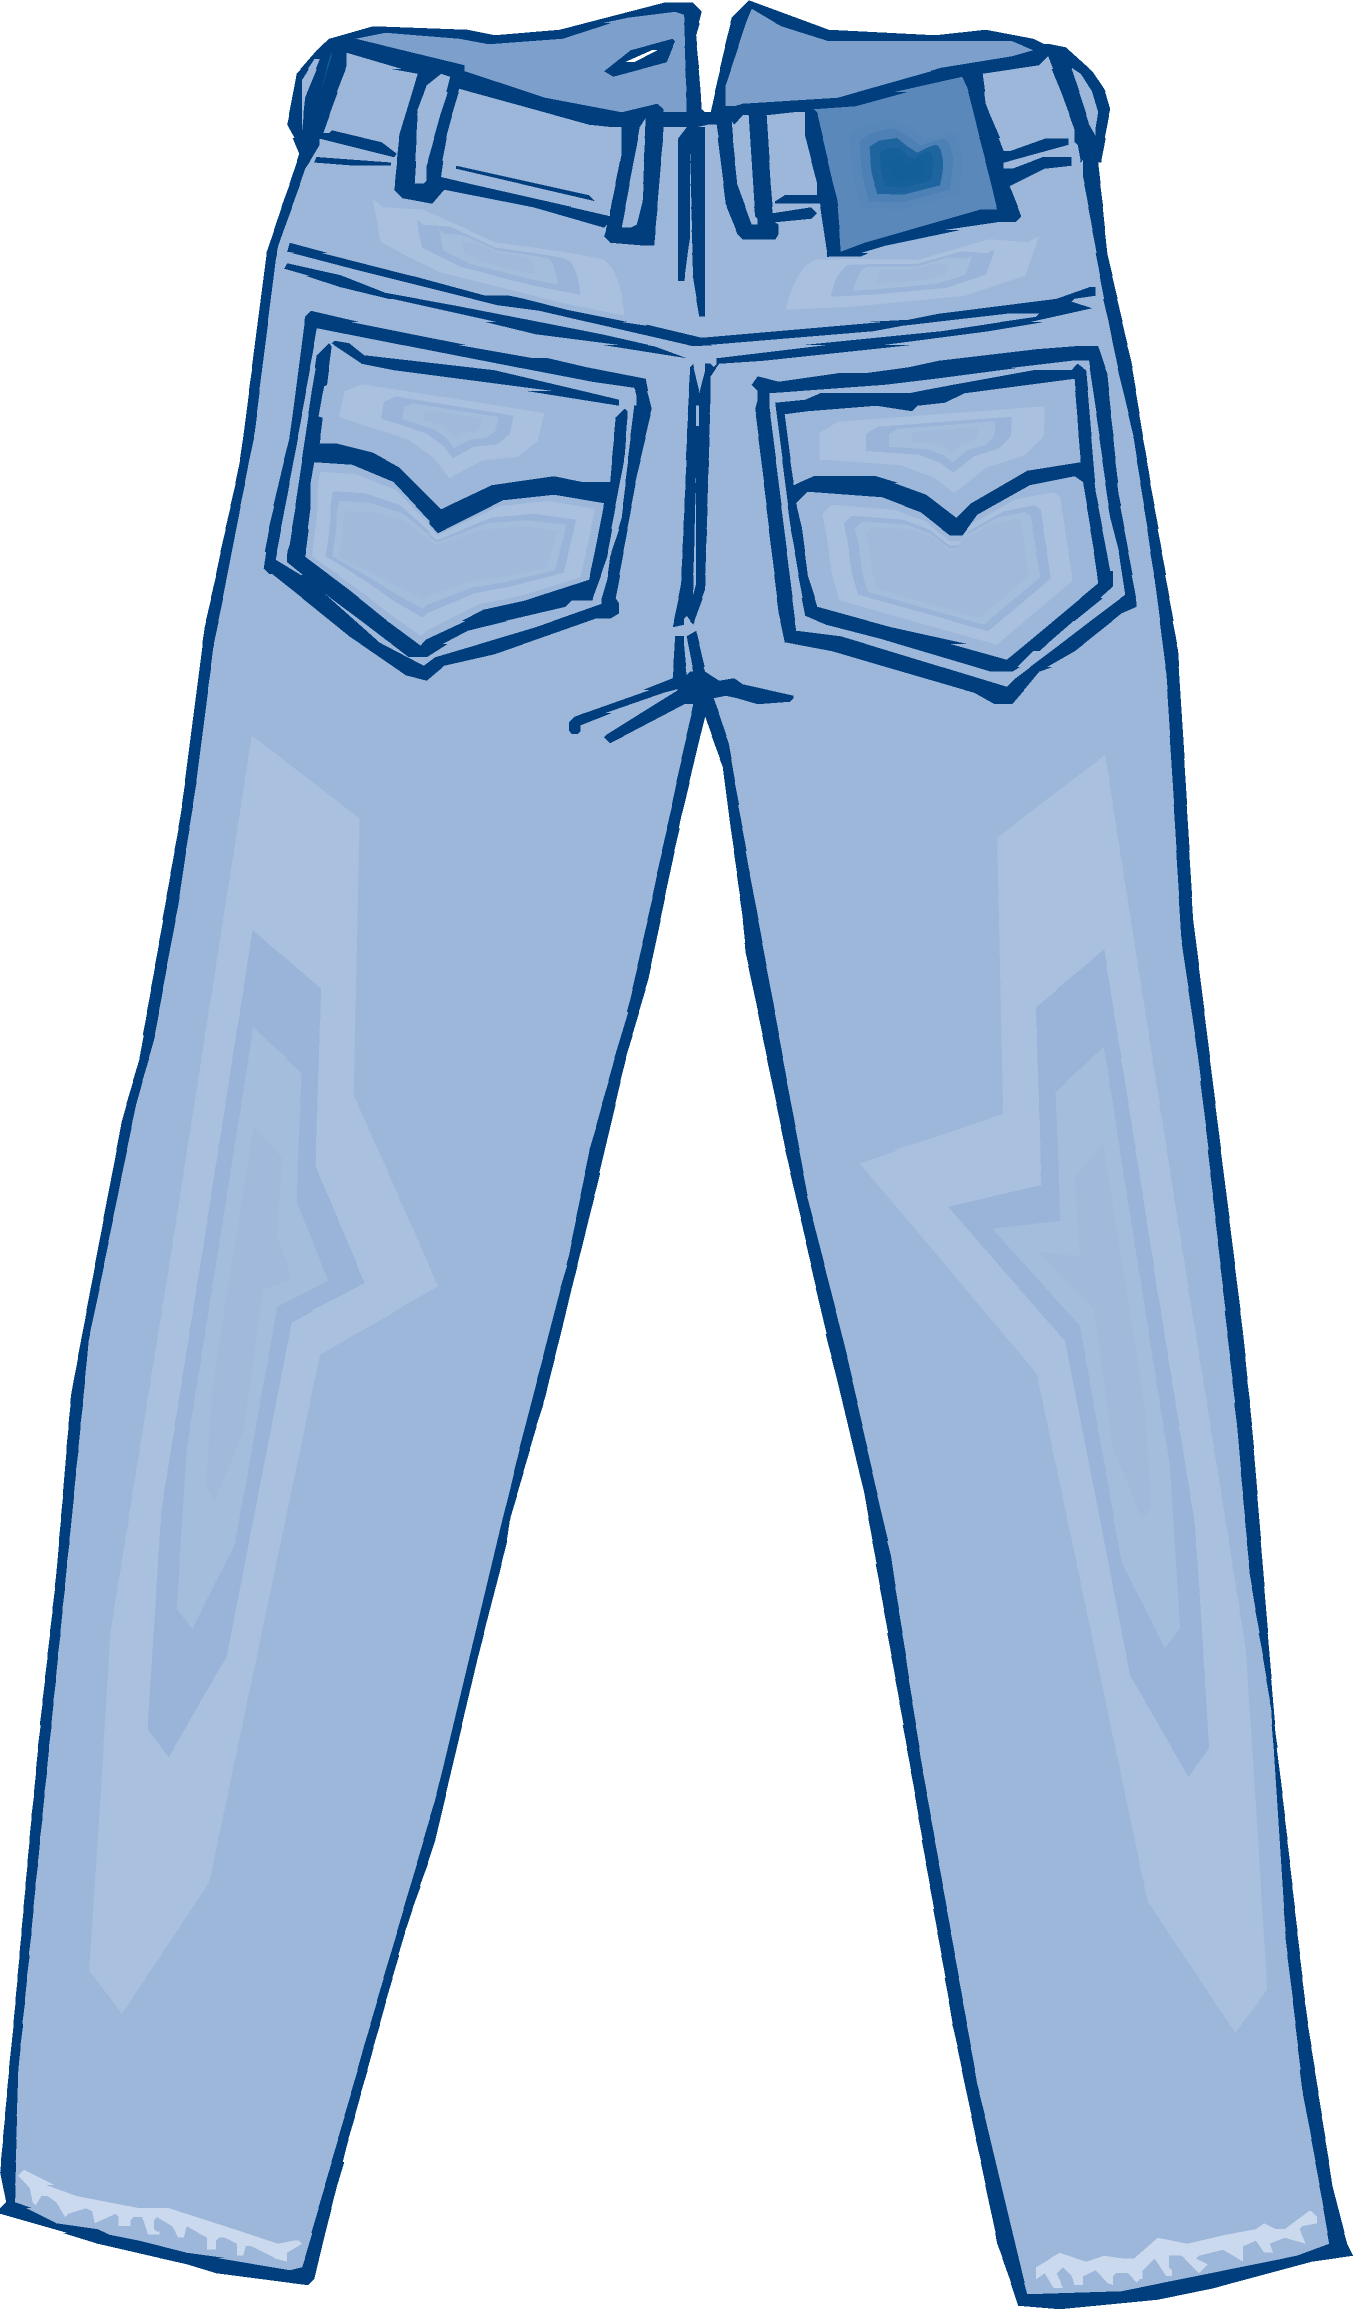 jeans clipart free - photo #15